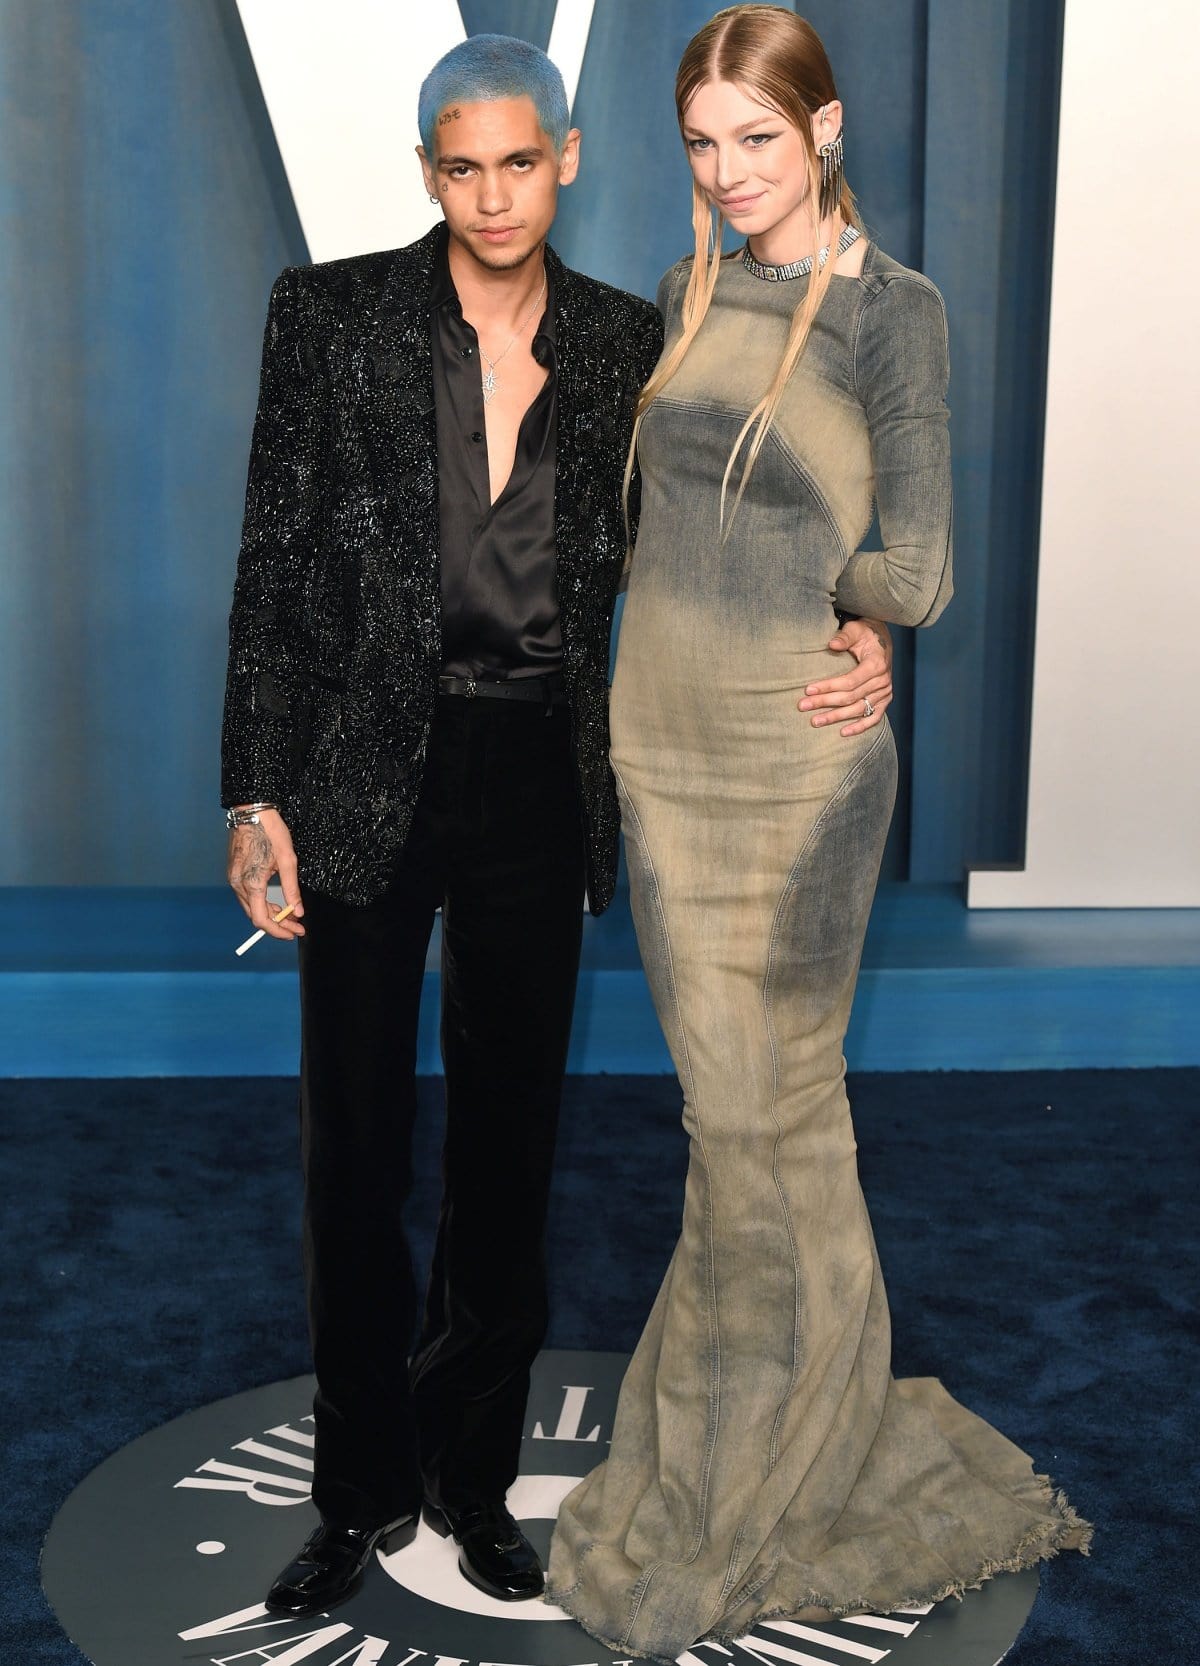 Dominic Fike in head-to-toe Saint Laurent and Hunter Schafer in a Rick Owens Fall 2022 dress